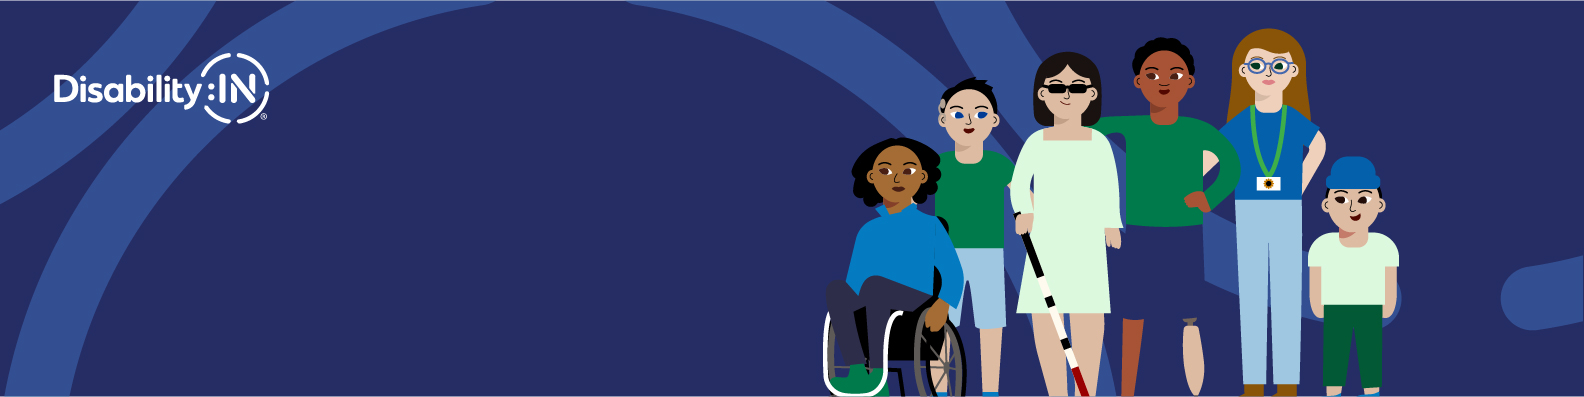 Illustration of six diverse individuals with disabilities gathered together against a dark blue background. DisabilityIN logo is shown in top left.